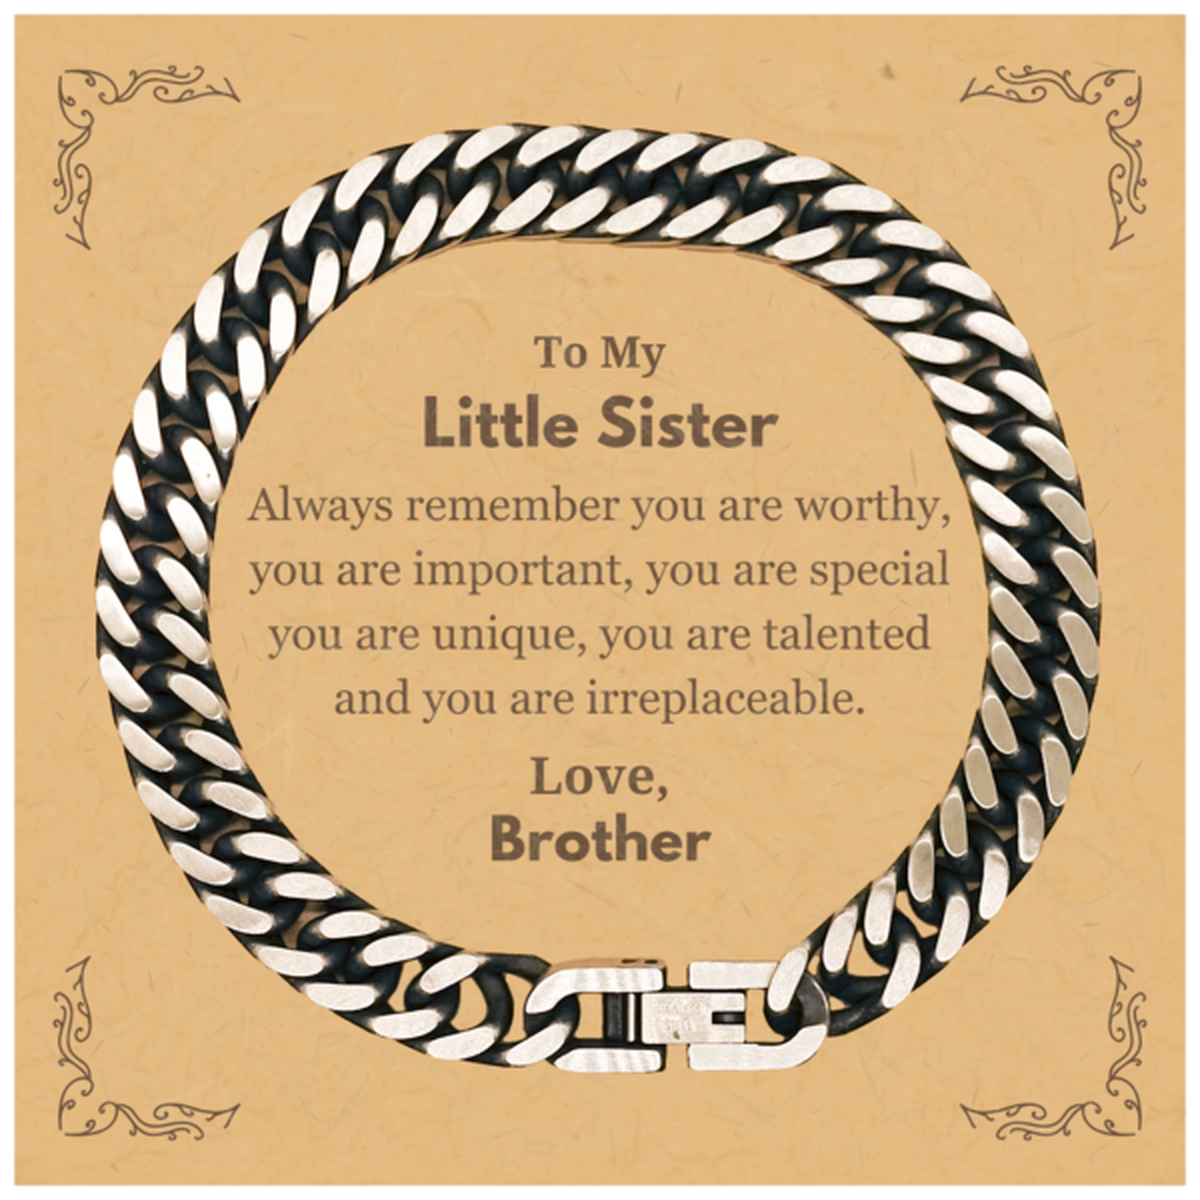 Little Sister Birthday Gifts from Brother, Inspirational Cuban Link Chain Bracelet for Little Sister Christmas Graduation Gifts for Little Sister Always remember you are worthy, you are important. Love, Brother